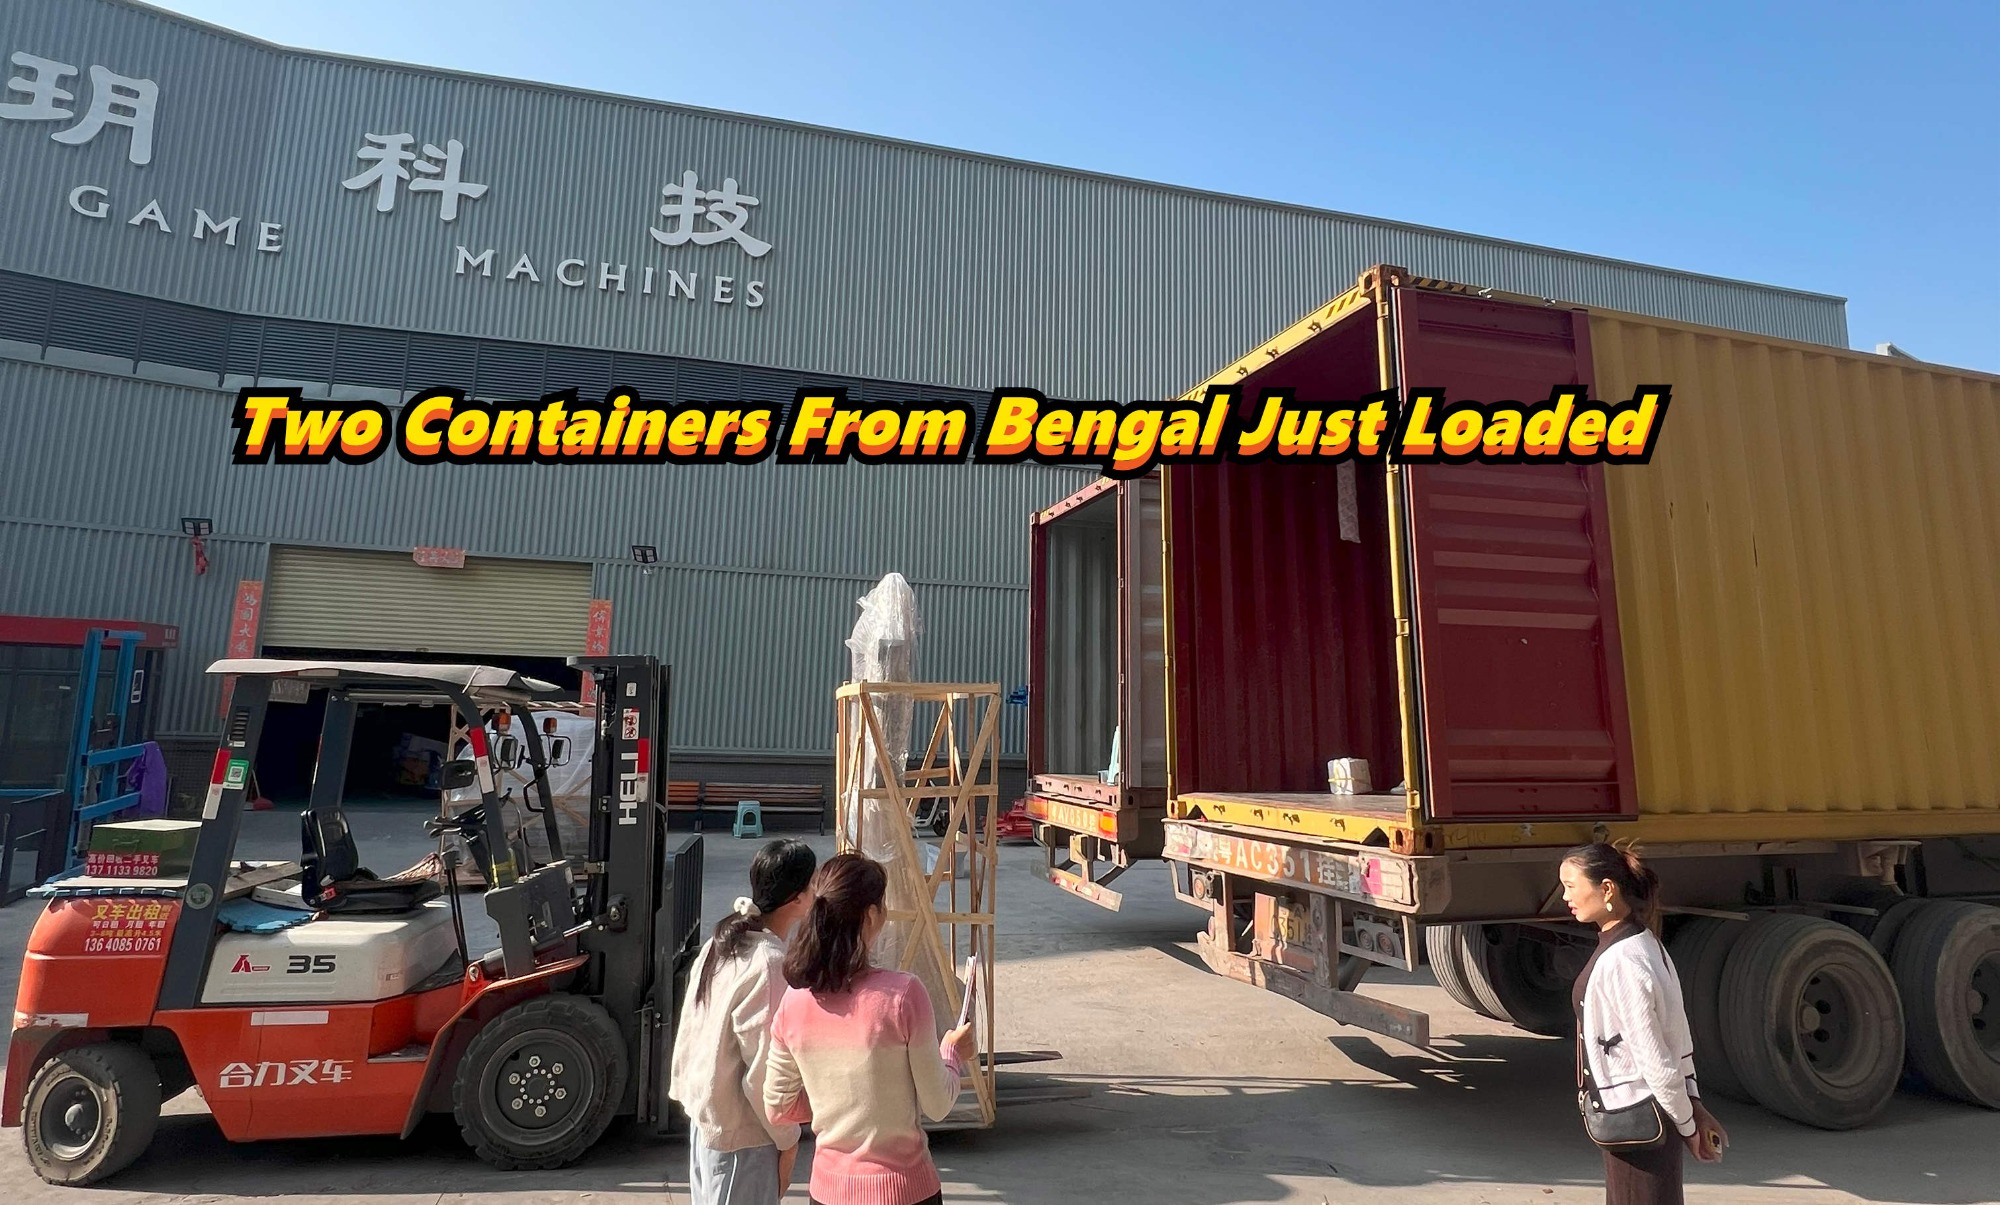 Two Containers From Bengal Just Loaded